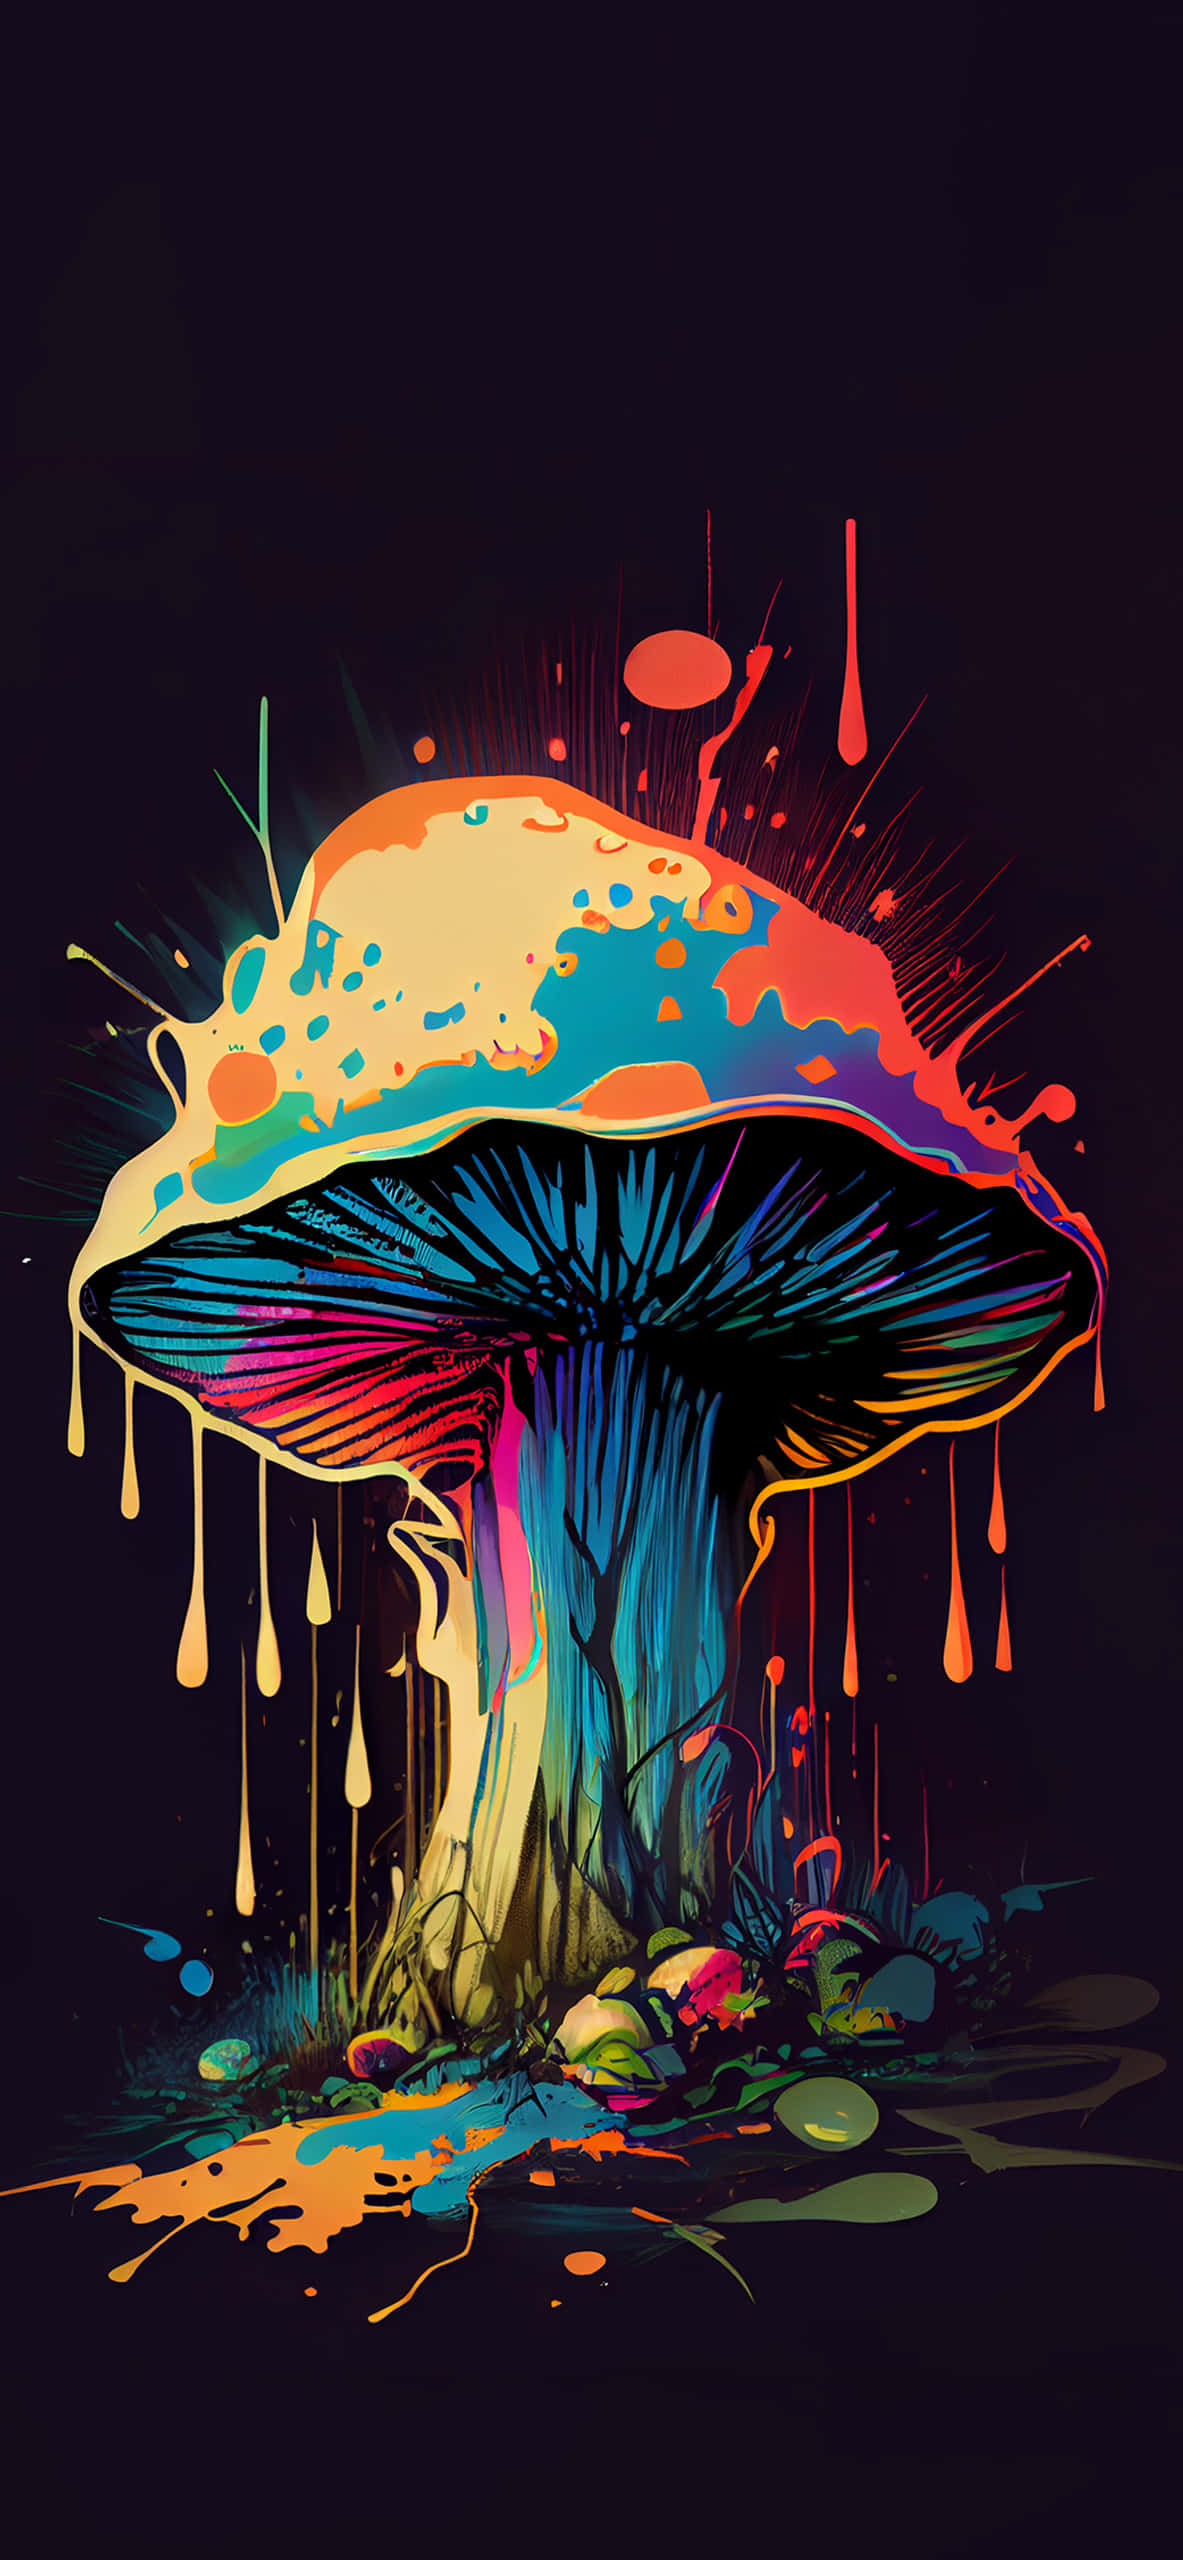 Trippy Mushroom For a Magical Journey Wallpaper